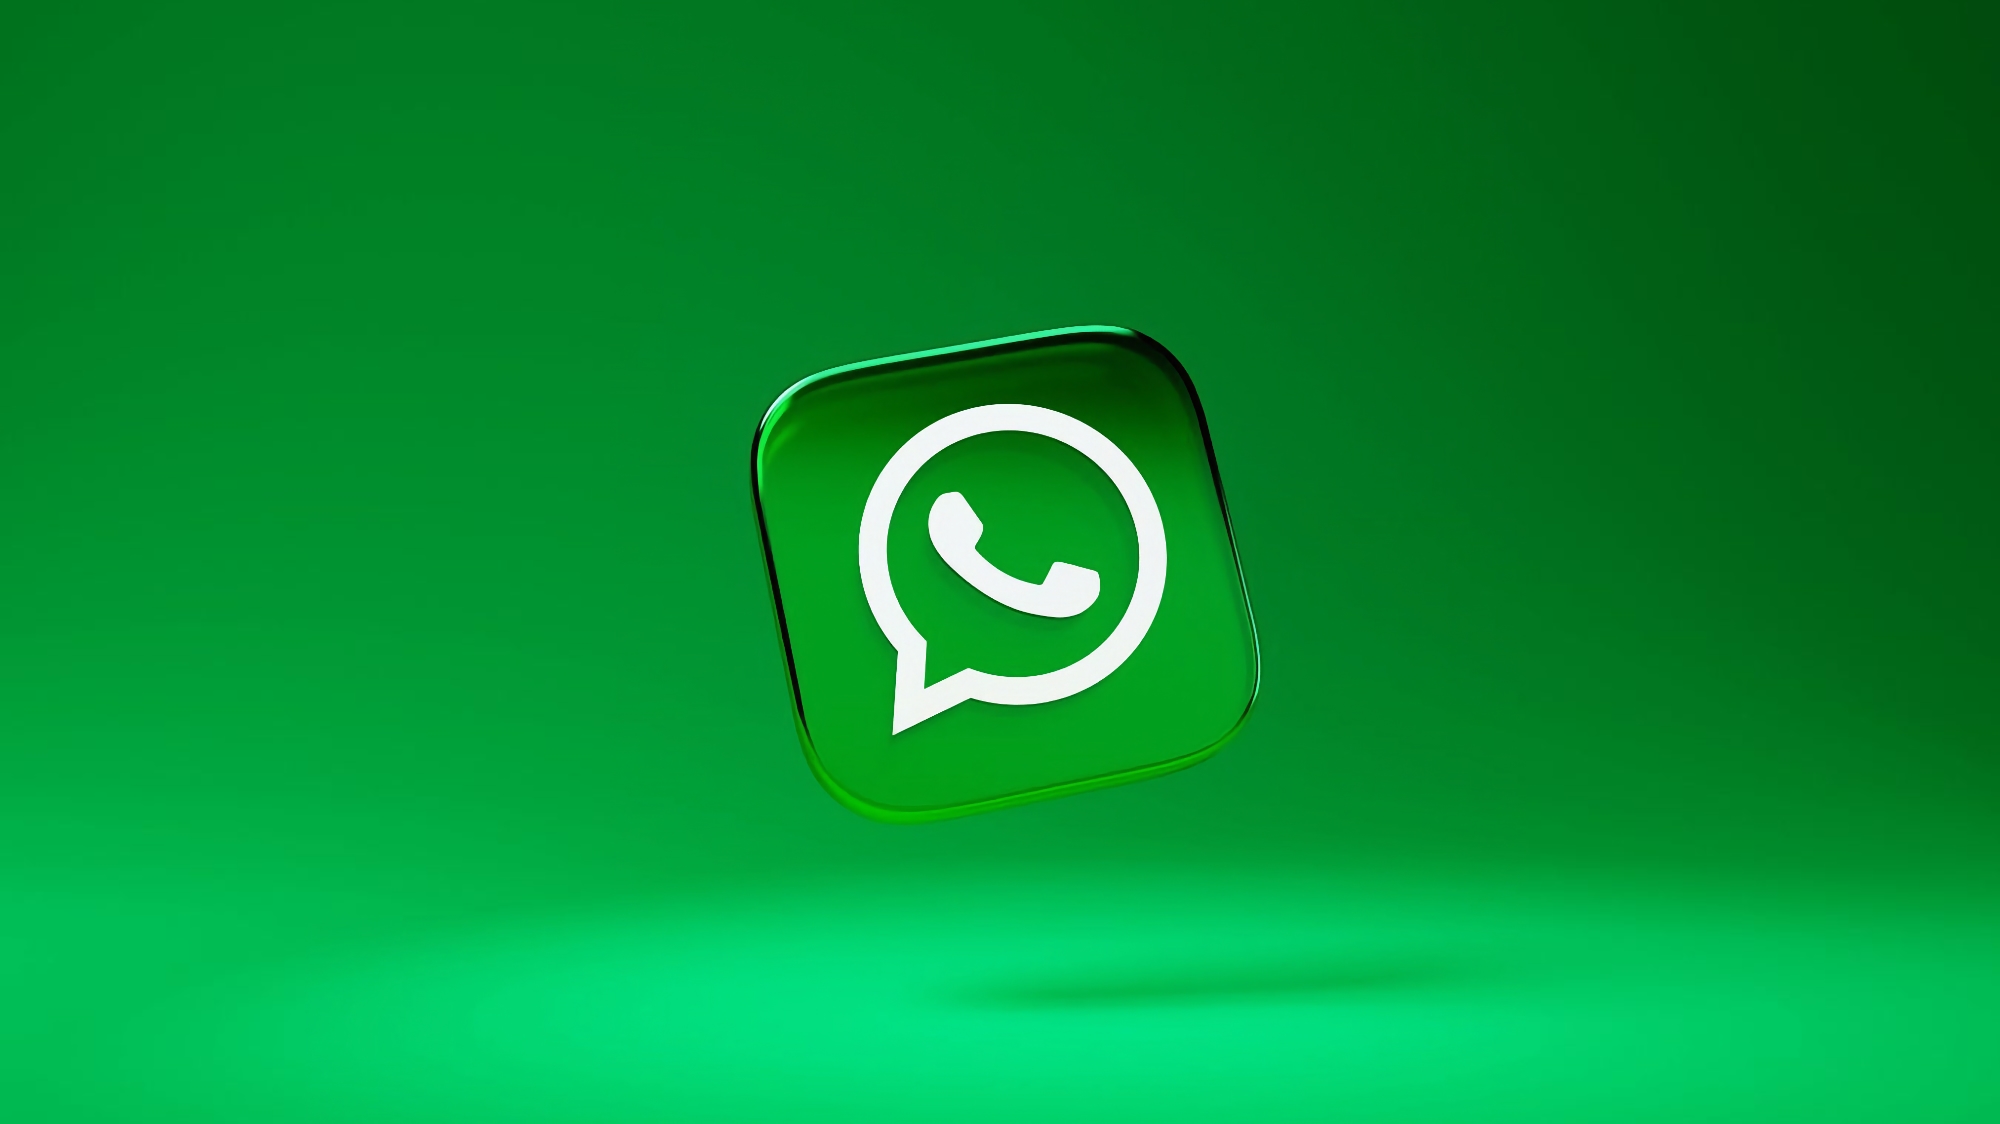 WhatsApp will offer the ability to send photos in high quality